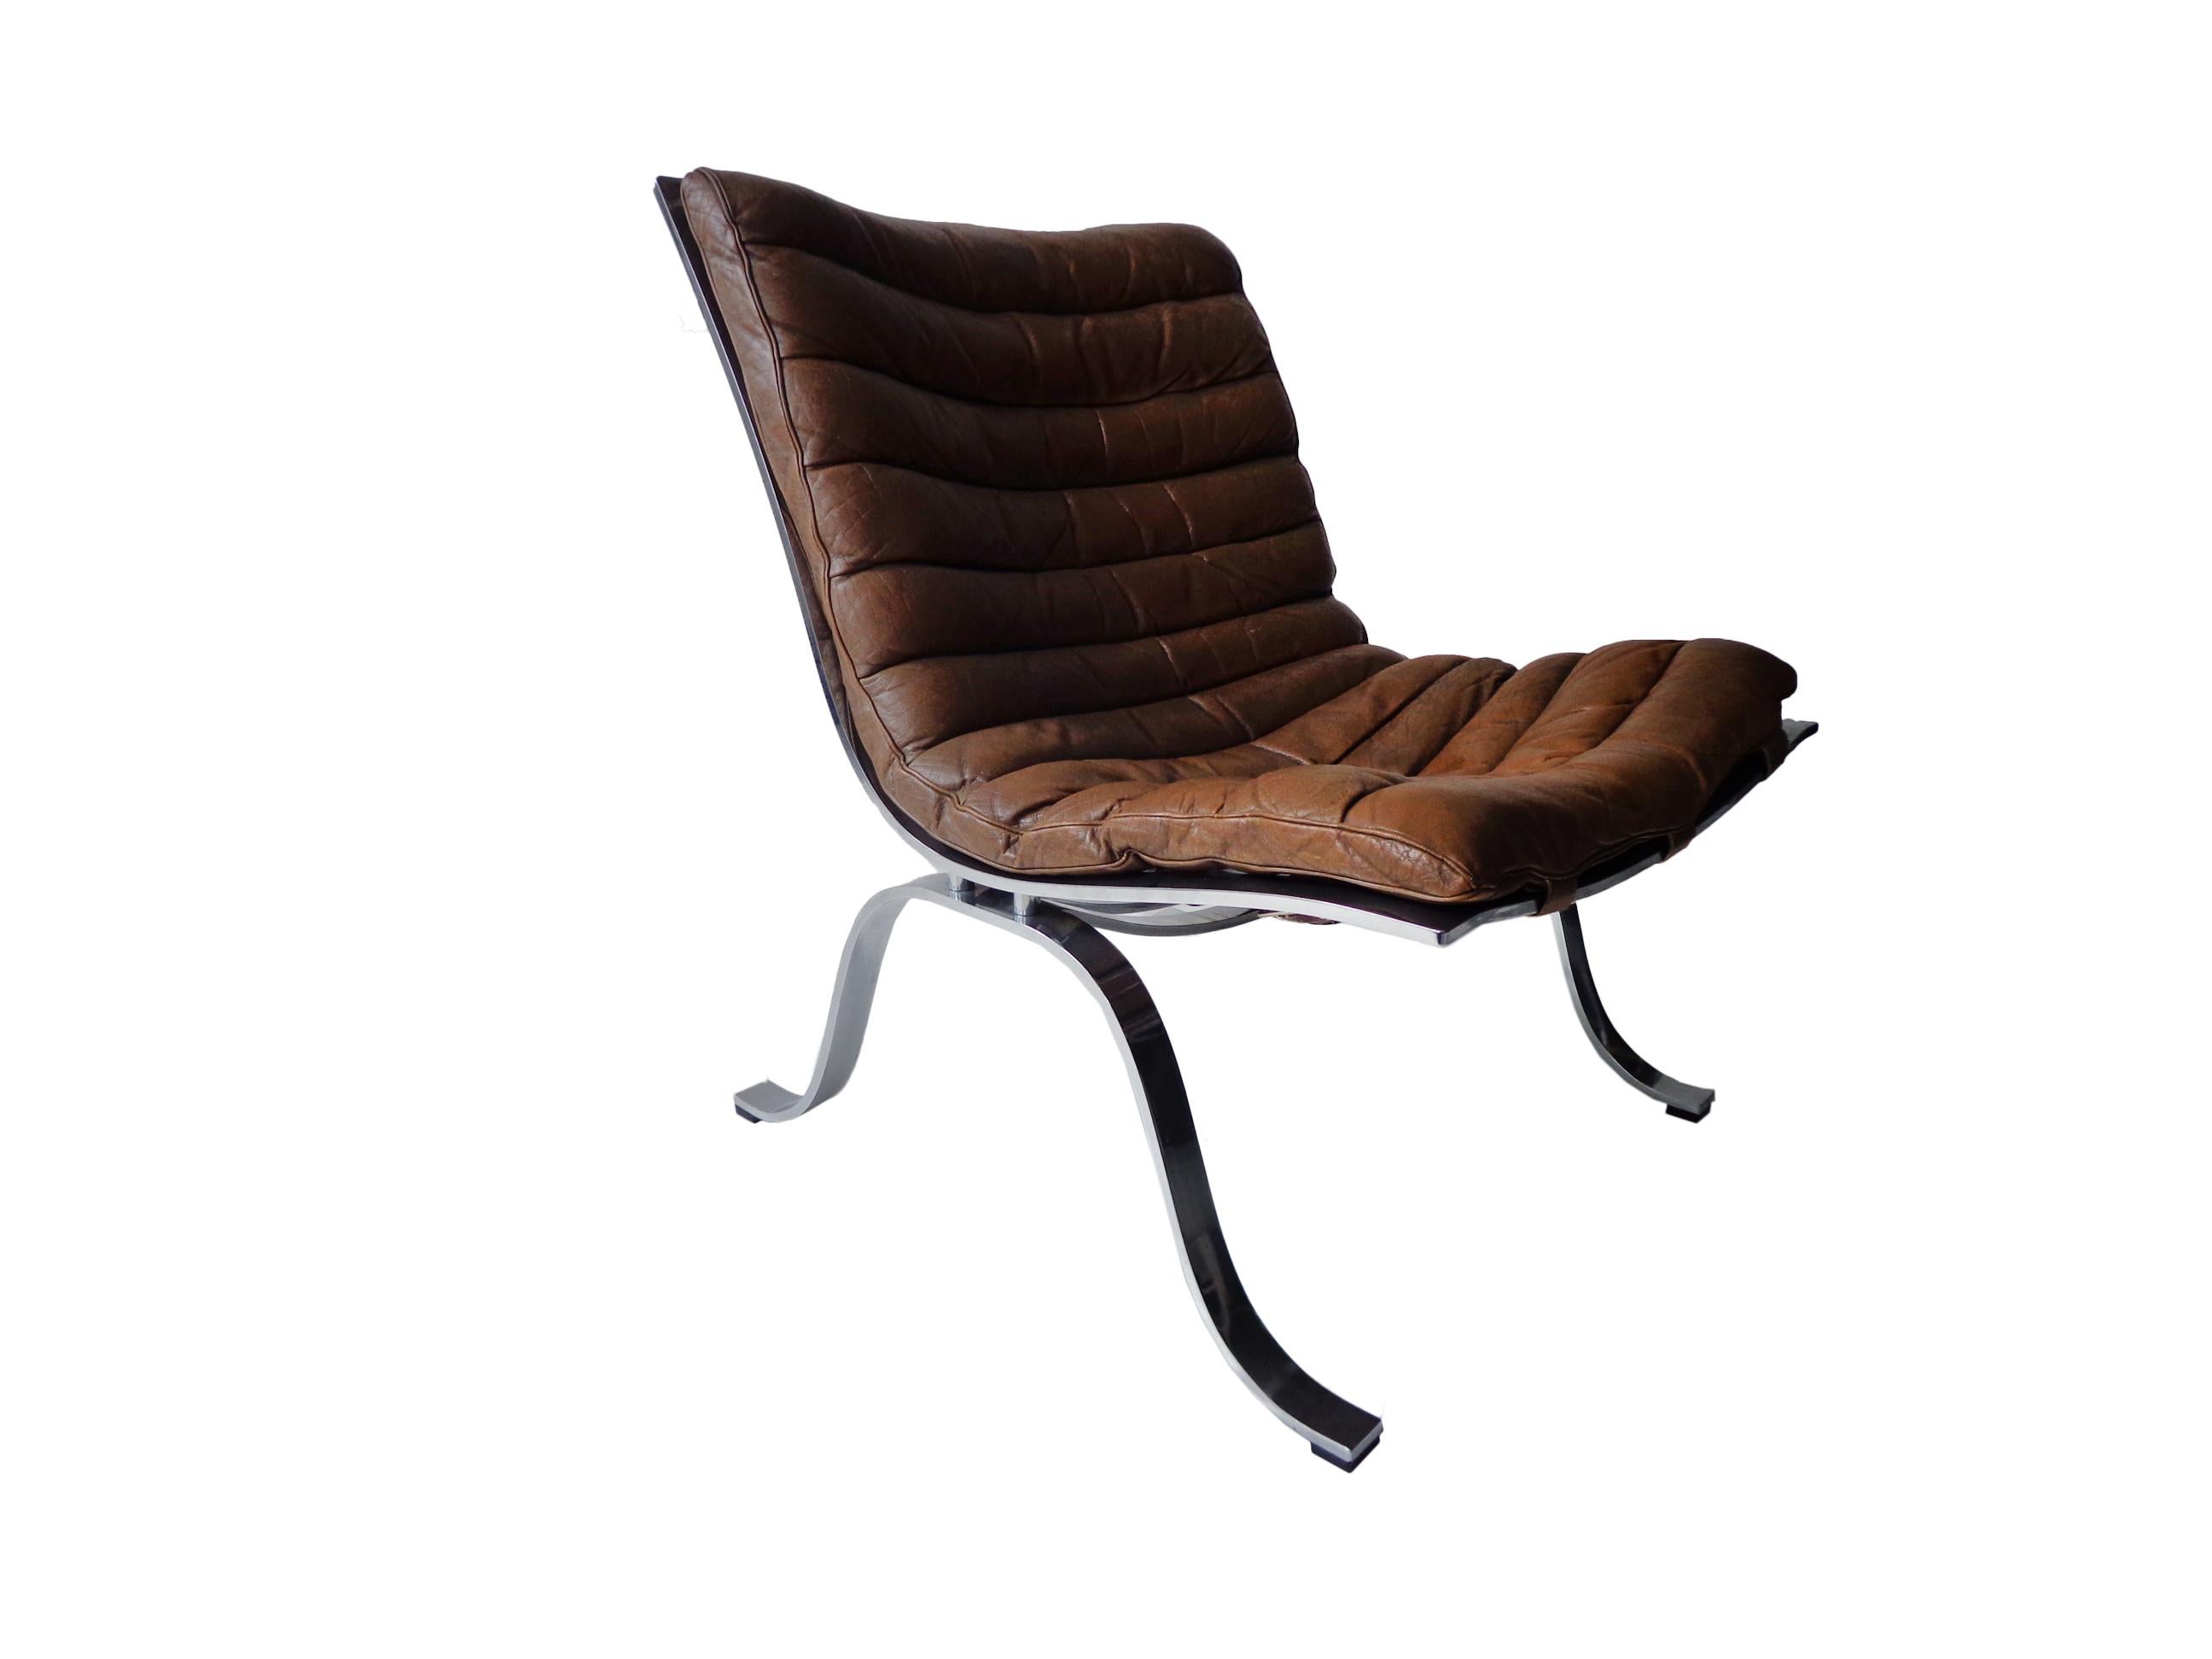 Arne Norell ‘Ariet’ Lounge Chair in Original Cognac/Brown Leather In Good Condition For Sale In Amsterdam, NL